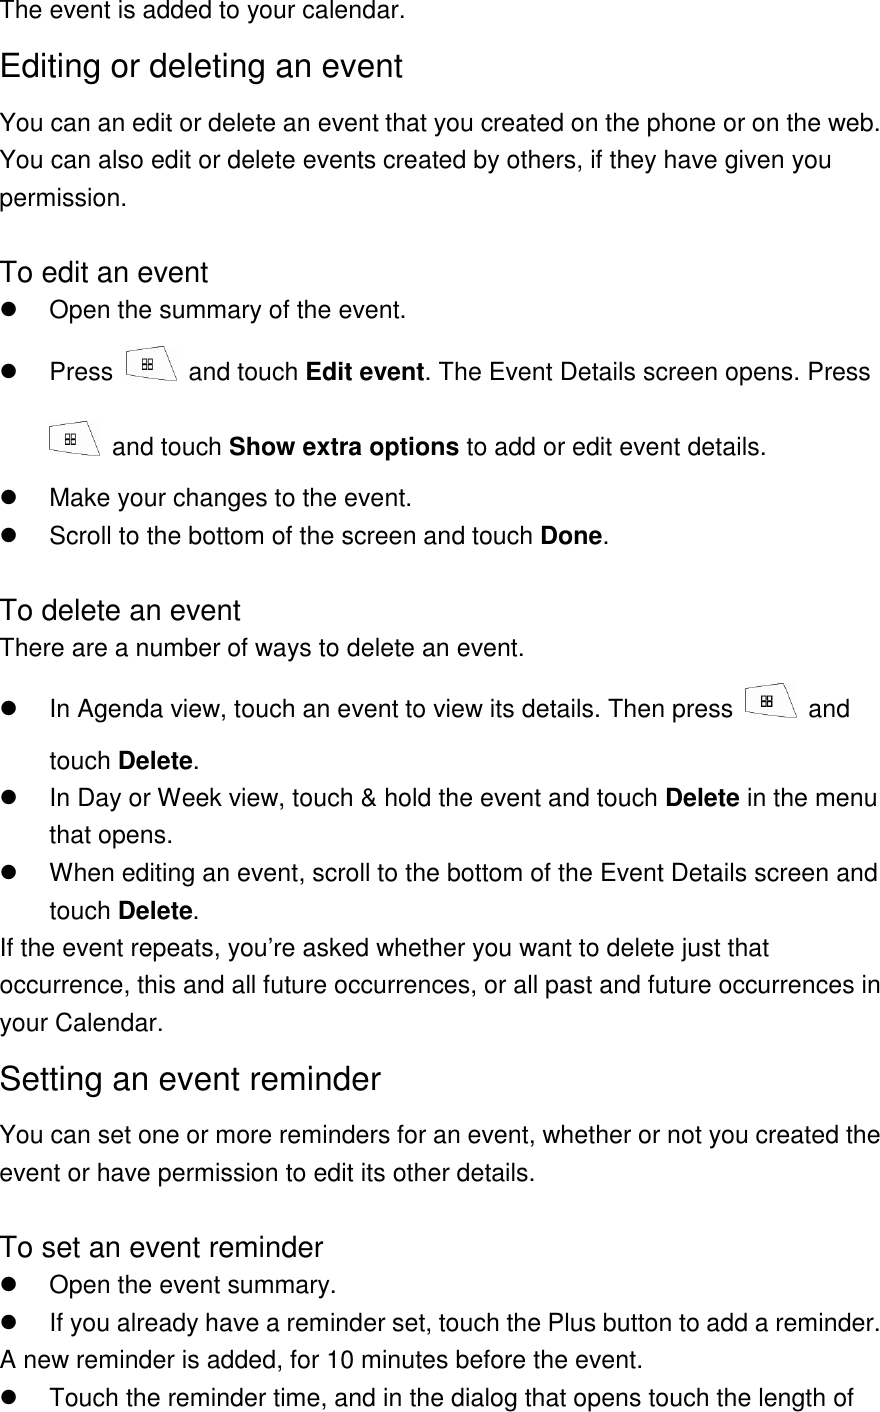 The event is added to your calendar. Editing or deleting an event You can an edit or delete an event that you created on the phone or on the web. You can also edit or delete events created by others, if they have given you permission.  To edit an event   Open the summary of the event.   Press    and touch Edit event. The Event Details screen opens. Press   and touch Show extra options to add or edit event details.   Make your changes to the event.   Scroll to the bottom of the screen and touch Done.  To delete an event There are a number of ways to delete an event.   In Agenda view, touch an event to view its details. Then press    and touch Delete.   In Day or Week view, touch &amp; hold the event and touch Delete in the menu that opens.   When editing an event, scroll to the bottom of the Event Details screen and touch Delete. If the event repeats, you’re asked whether you want to delete just that occurrence, this and all future occurrences, or all past and future occurrences in your Calendar. Setting an event reminder You can set one or more reminders for an event, whether or not you created the event or have permission to edit its other details.  To set an event reminder   Open the event summary.   If you already have a reminder set, touch the Plus button to add a reminder. A new reminder is added, for 10 minutes before the event.   Touch the reminder time, and in the dialog that opens touch the length of 